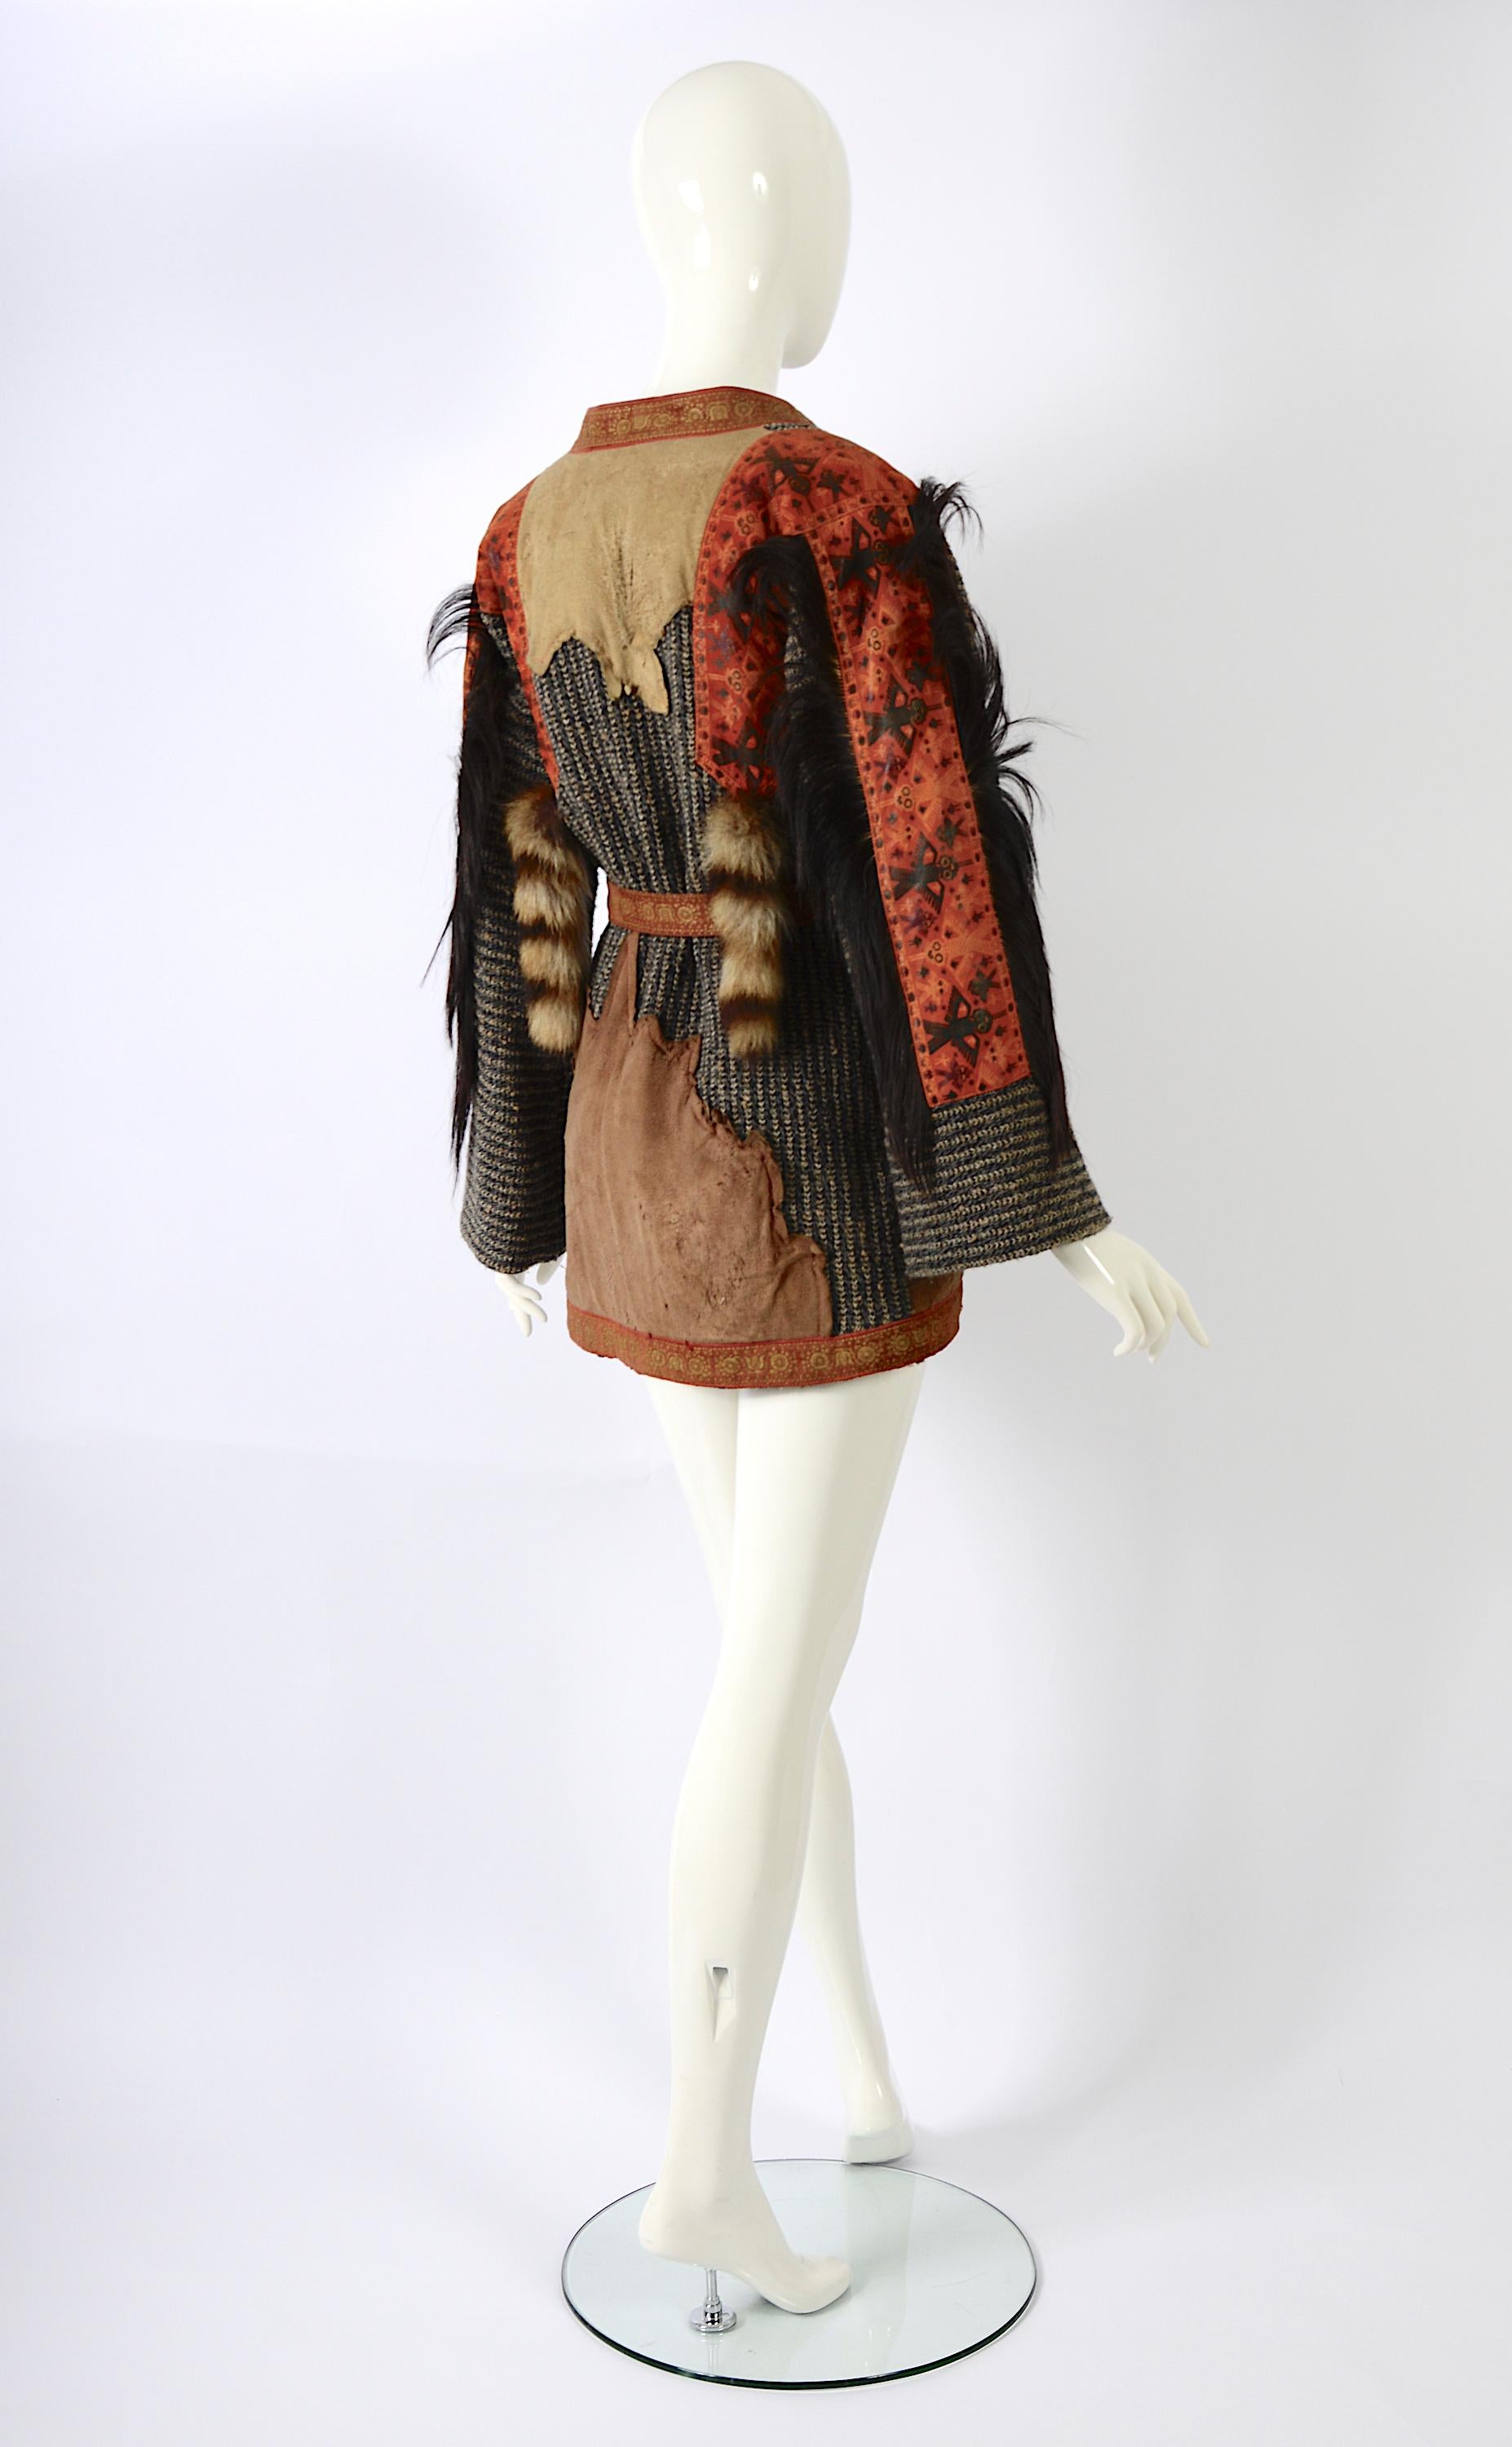 Roberto Cavalli Museum-Worthy 1971 Patchwork Debut Collection Vintage Jacket  For Sale 3